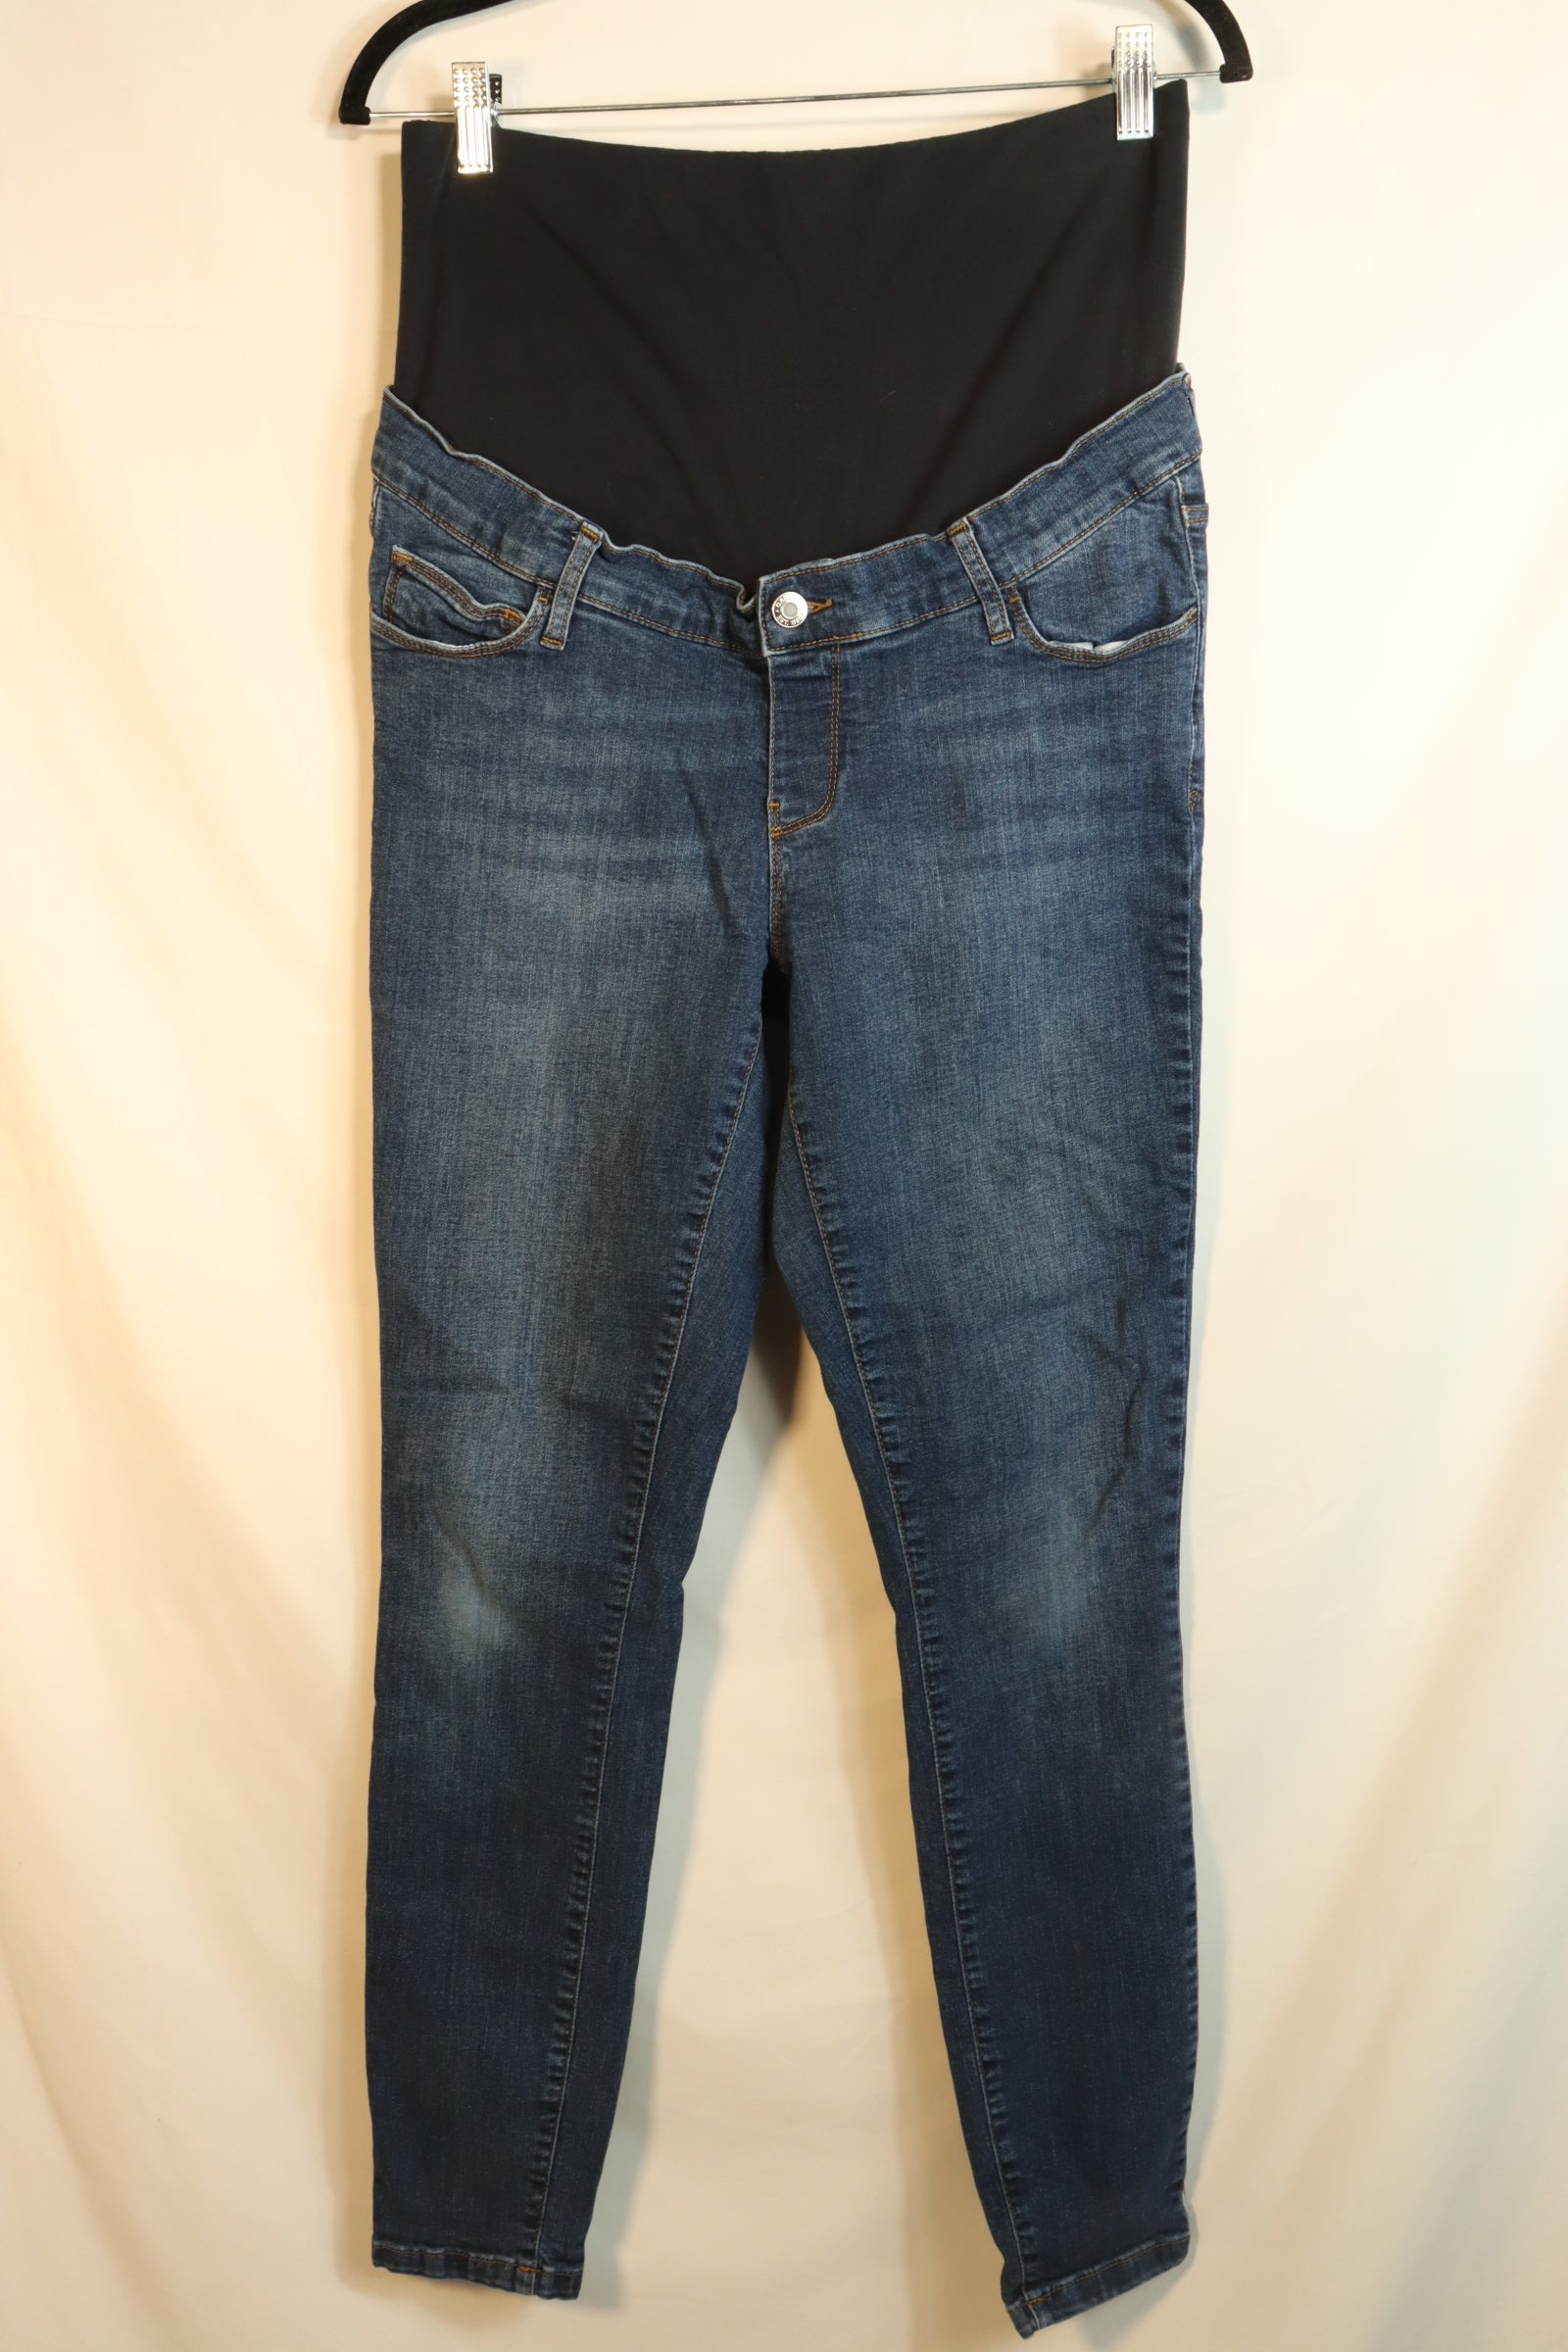 Gap, Skinny Maternity Jeans with Panel, Size 30/10 Long – Mini Moose  Consignment